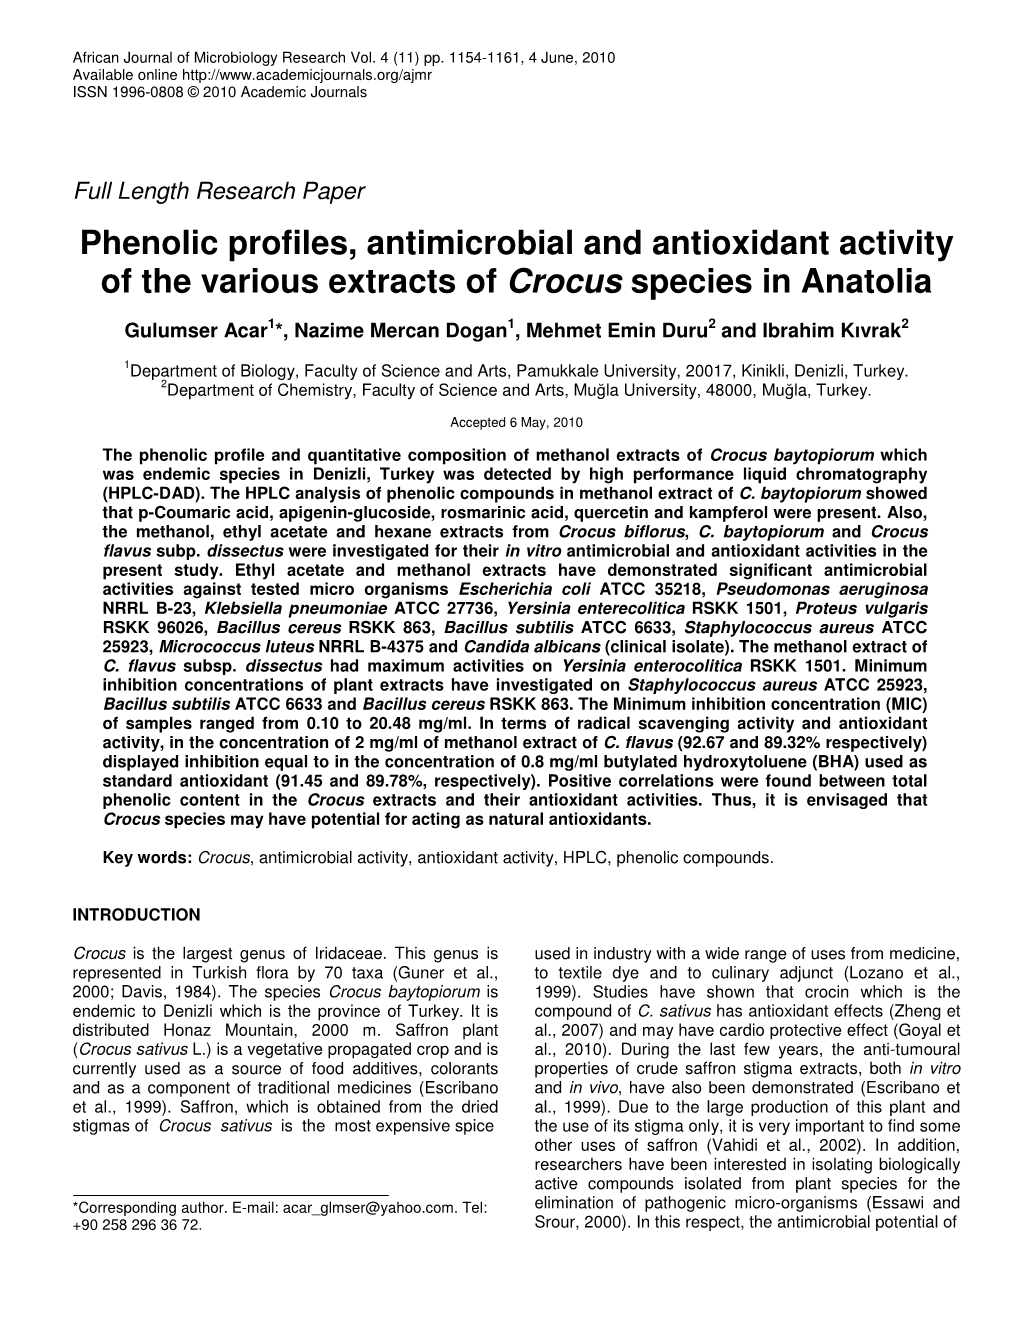 Phenolic Profiles, Antimicrobial and Antioxidant Activity of the Various Extracts of Crocus Species in Anatolia